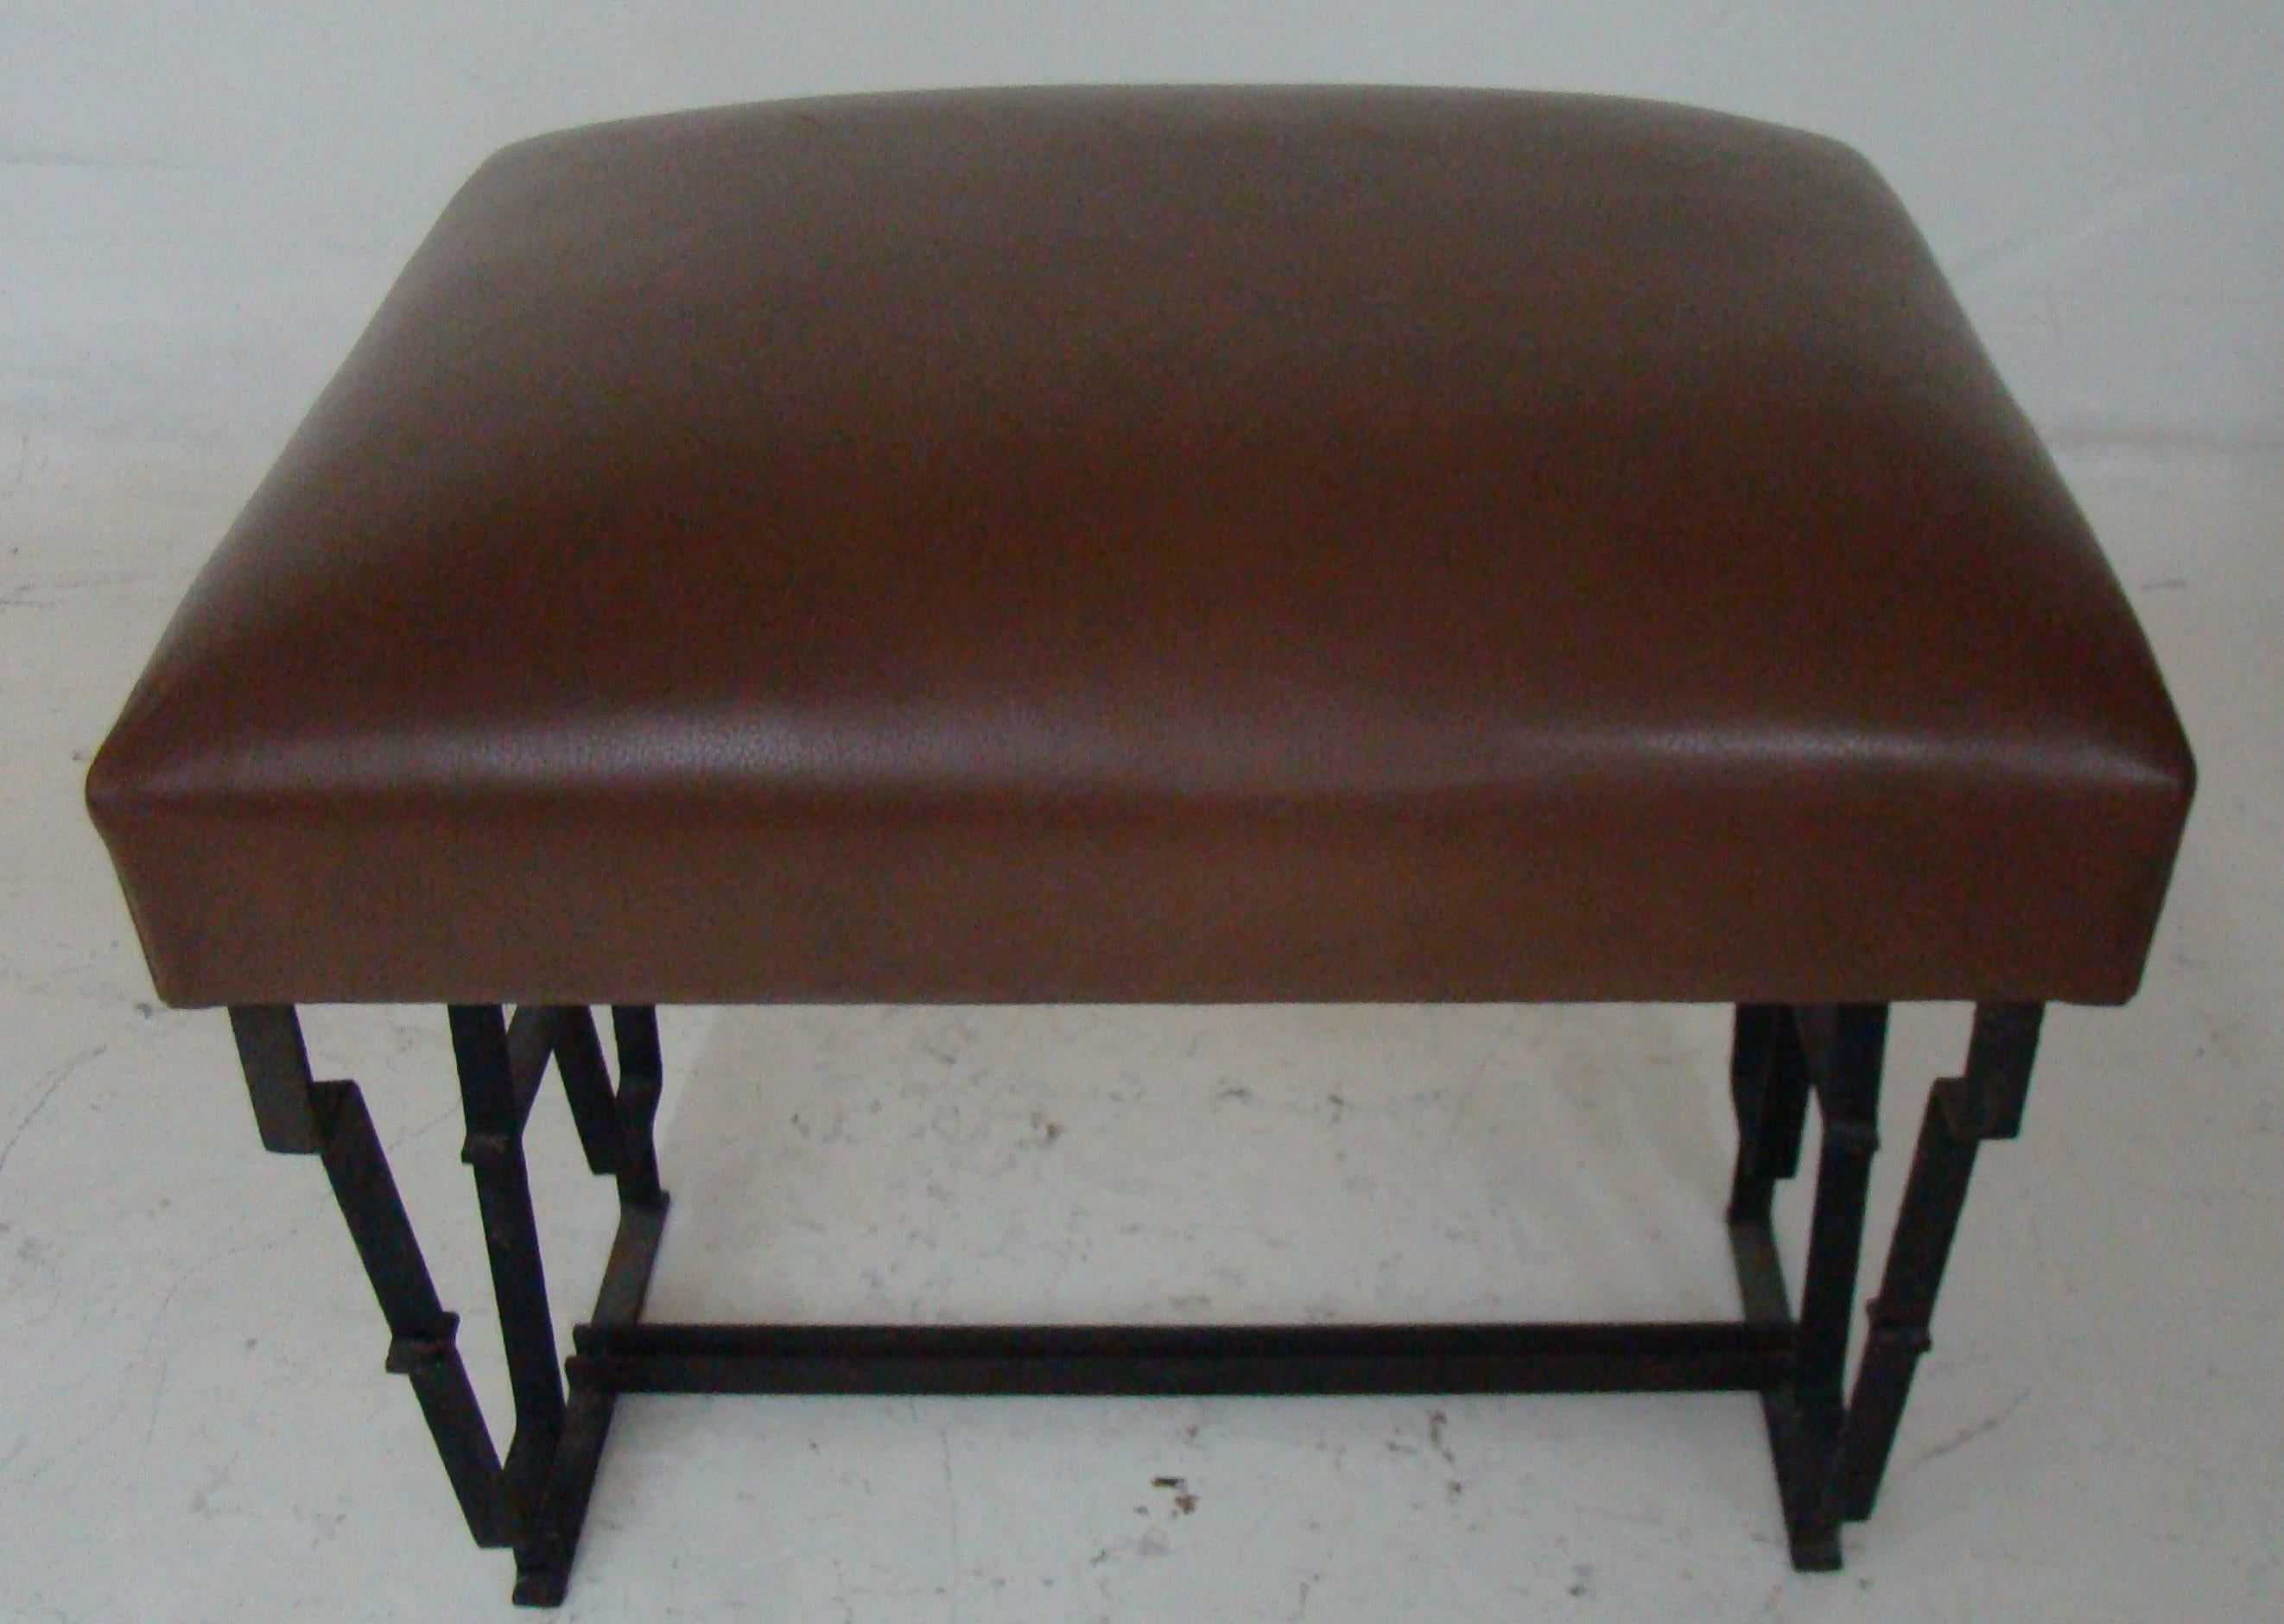 Stools Art Deco.

 Material: iron and leather
You want to live in the golden years, this is the stool that your project needs.
We have specialized in the sale of Art Deco and Art Nouveau styles since 1982.If you have any questions we are at your